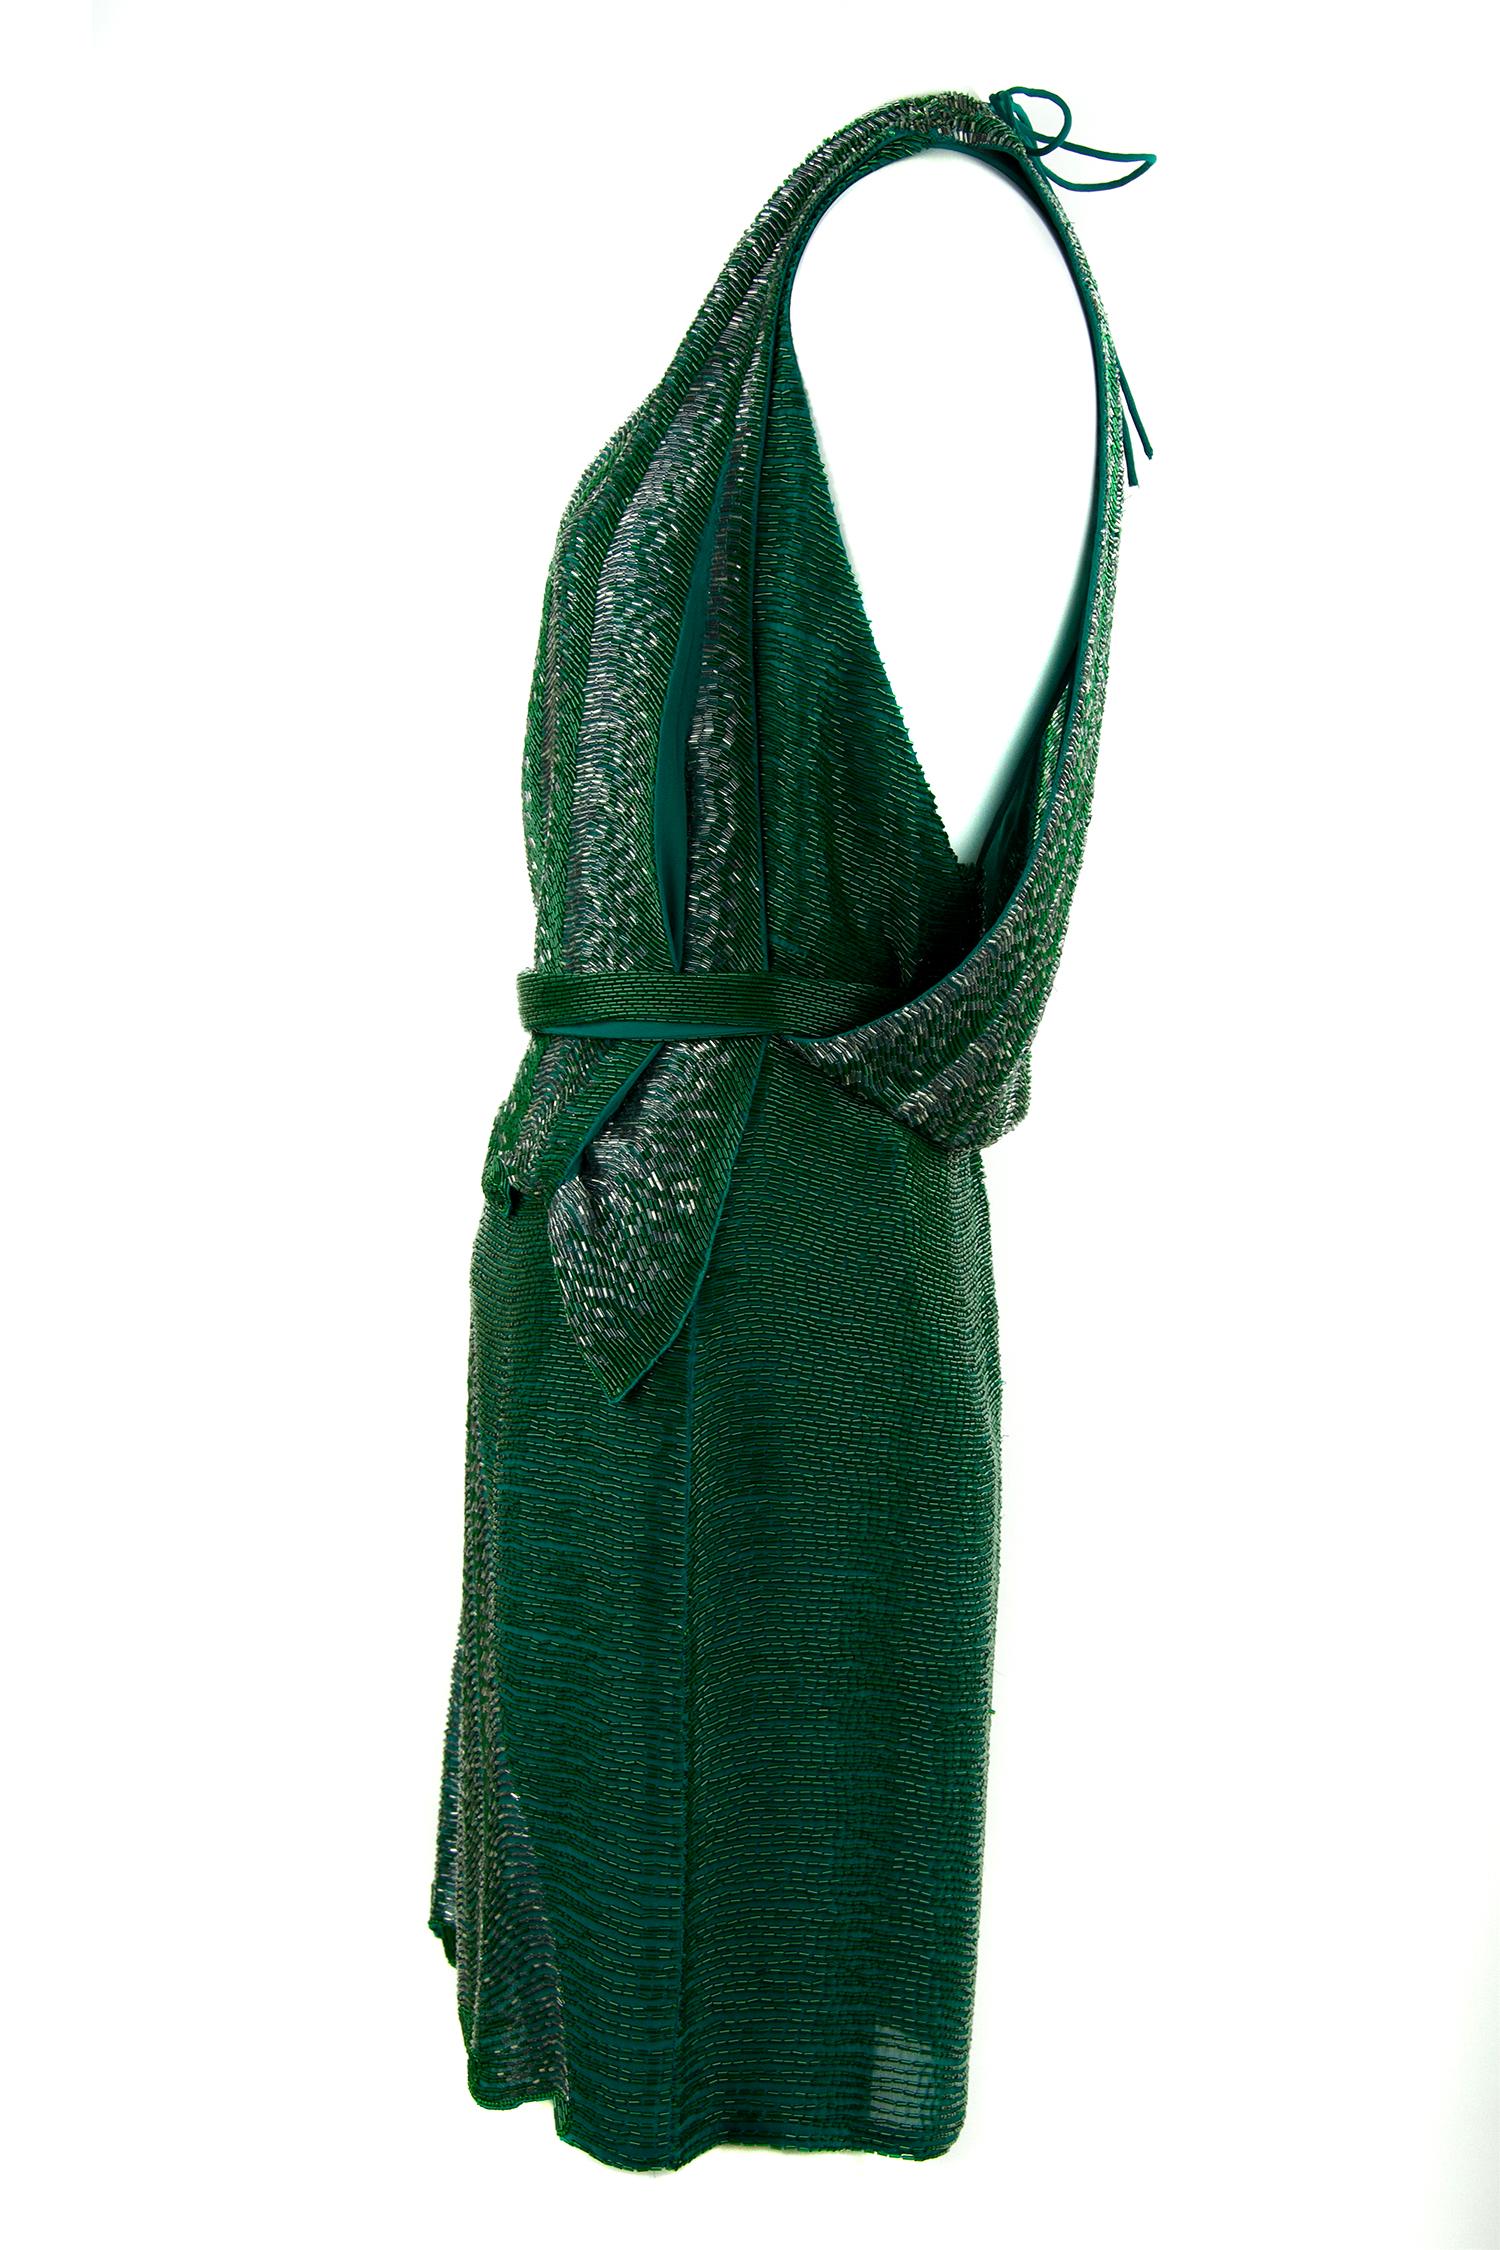 Heavily beaded deep green Roberto Cavalli dress with a sexy low v-neck and racerback style.  Features intricate detail and a belt to cinch the waist.  

Size: IT 40

Condition: New with tags

Composition: 100% silk / lining 100% viscose

Made in